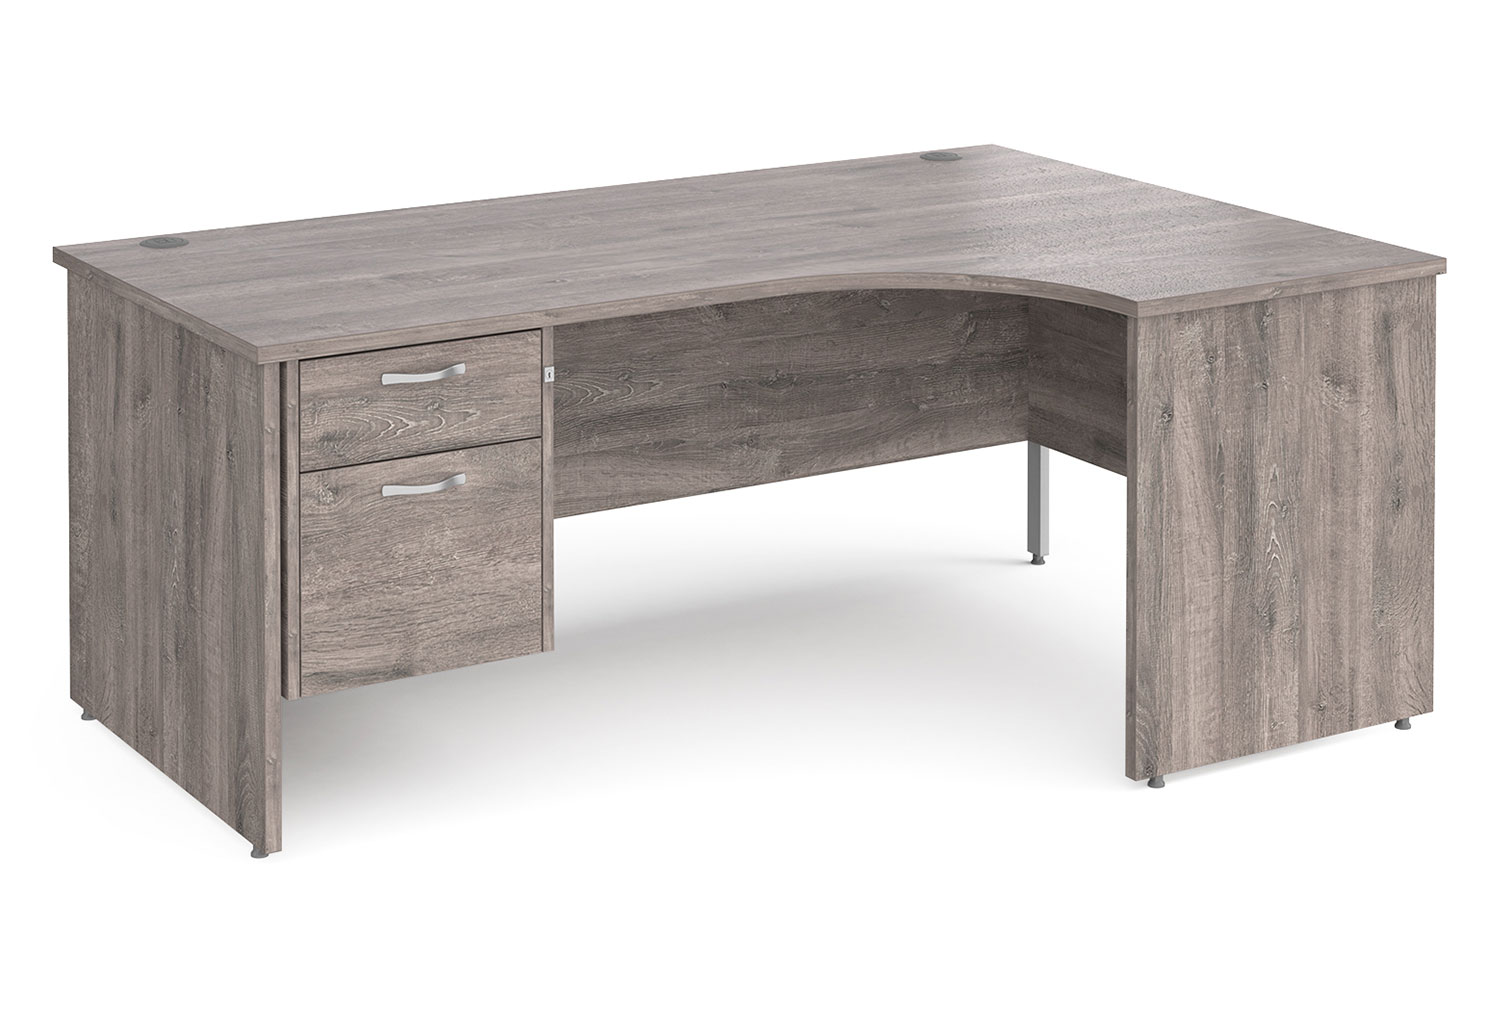 Tully Panel End Right Hand Ergonomic Office Desk 2 Drawers, 180wx120/80dx73h (cm), Grey Oak, Express Delivery